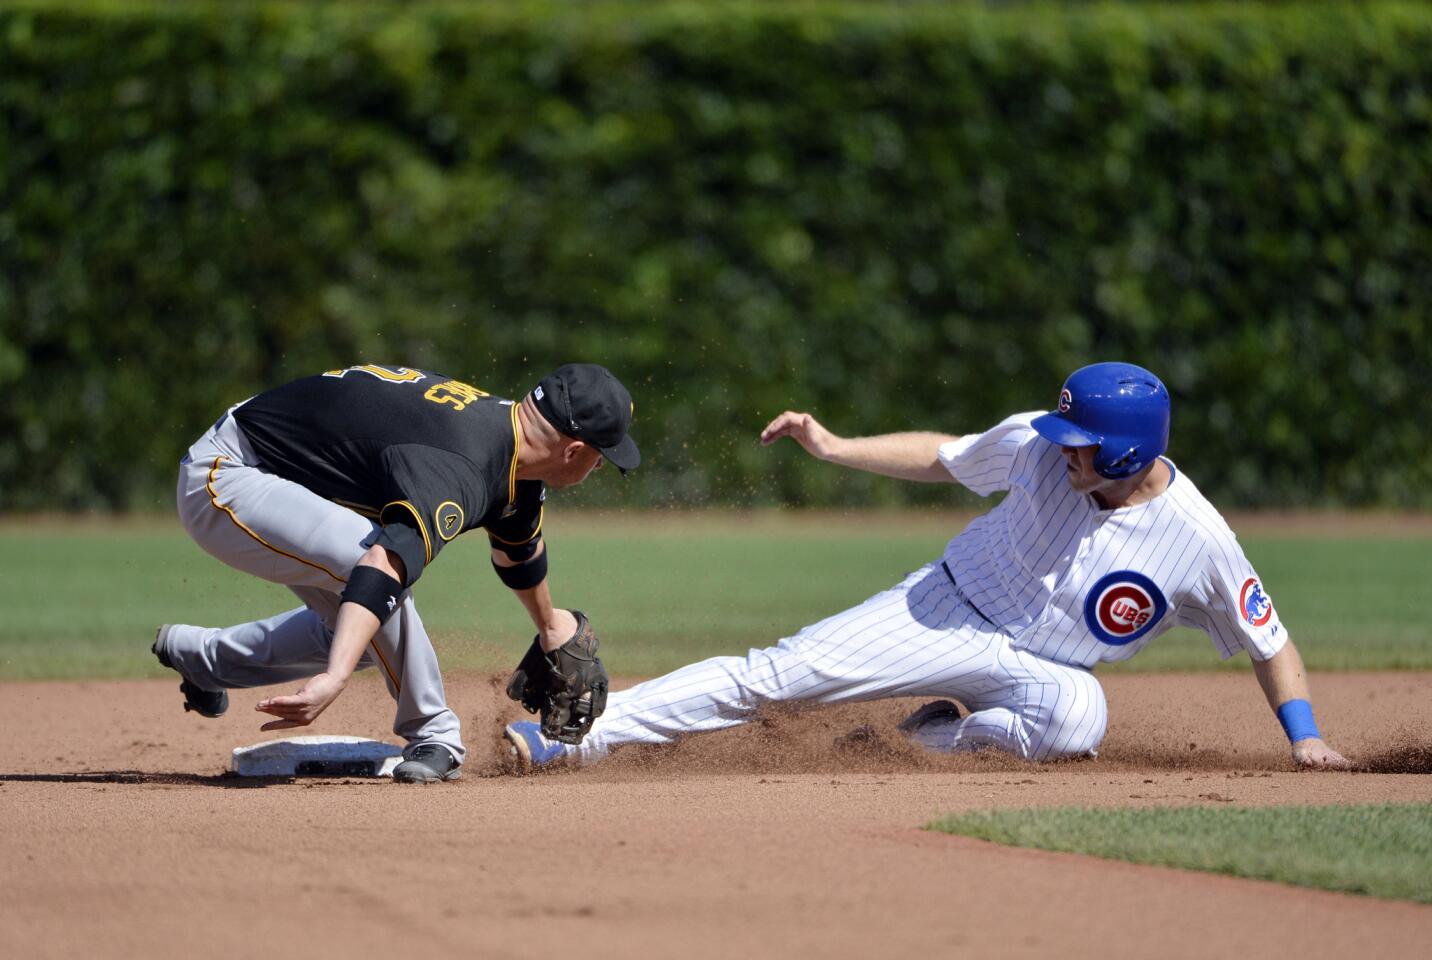 Pittsburgh Pirates v Chicago Cubs